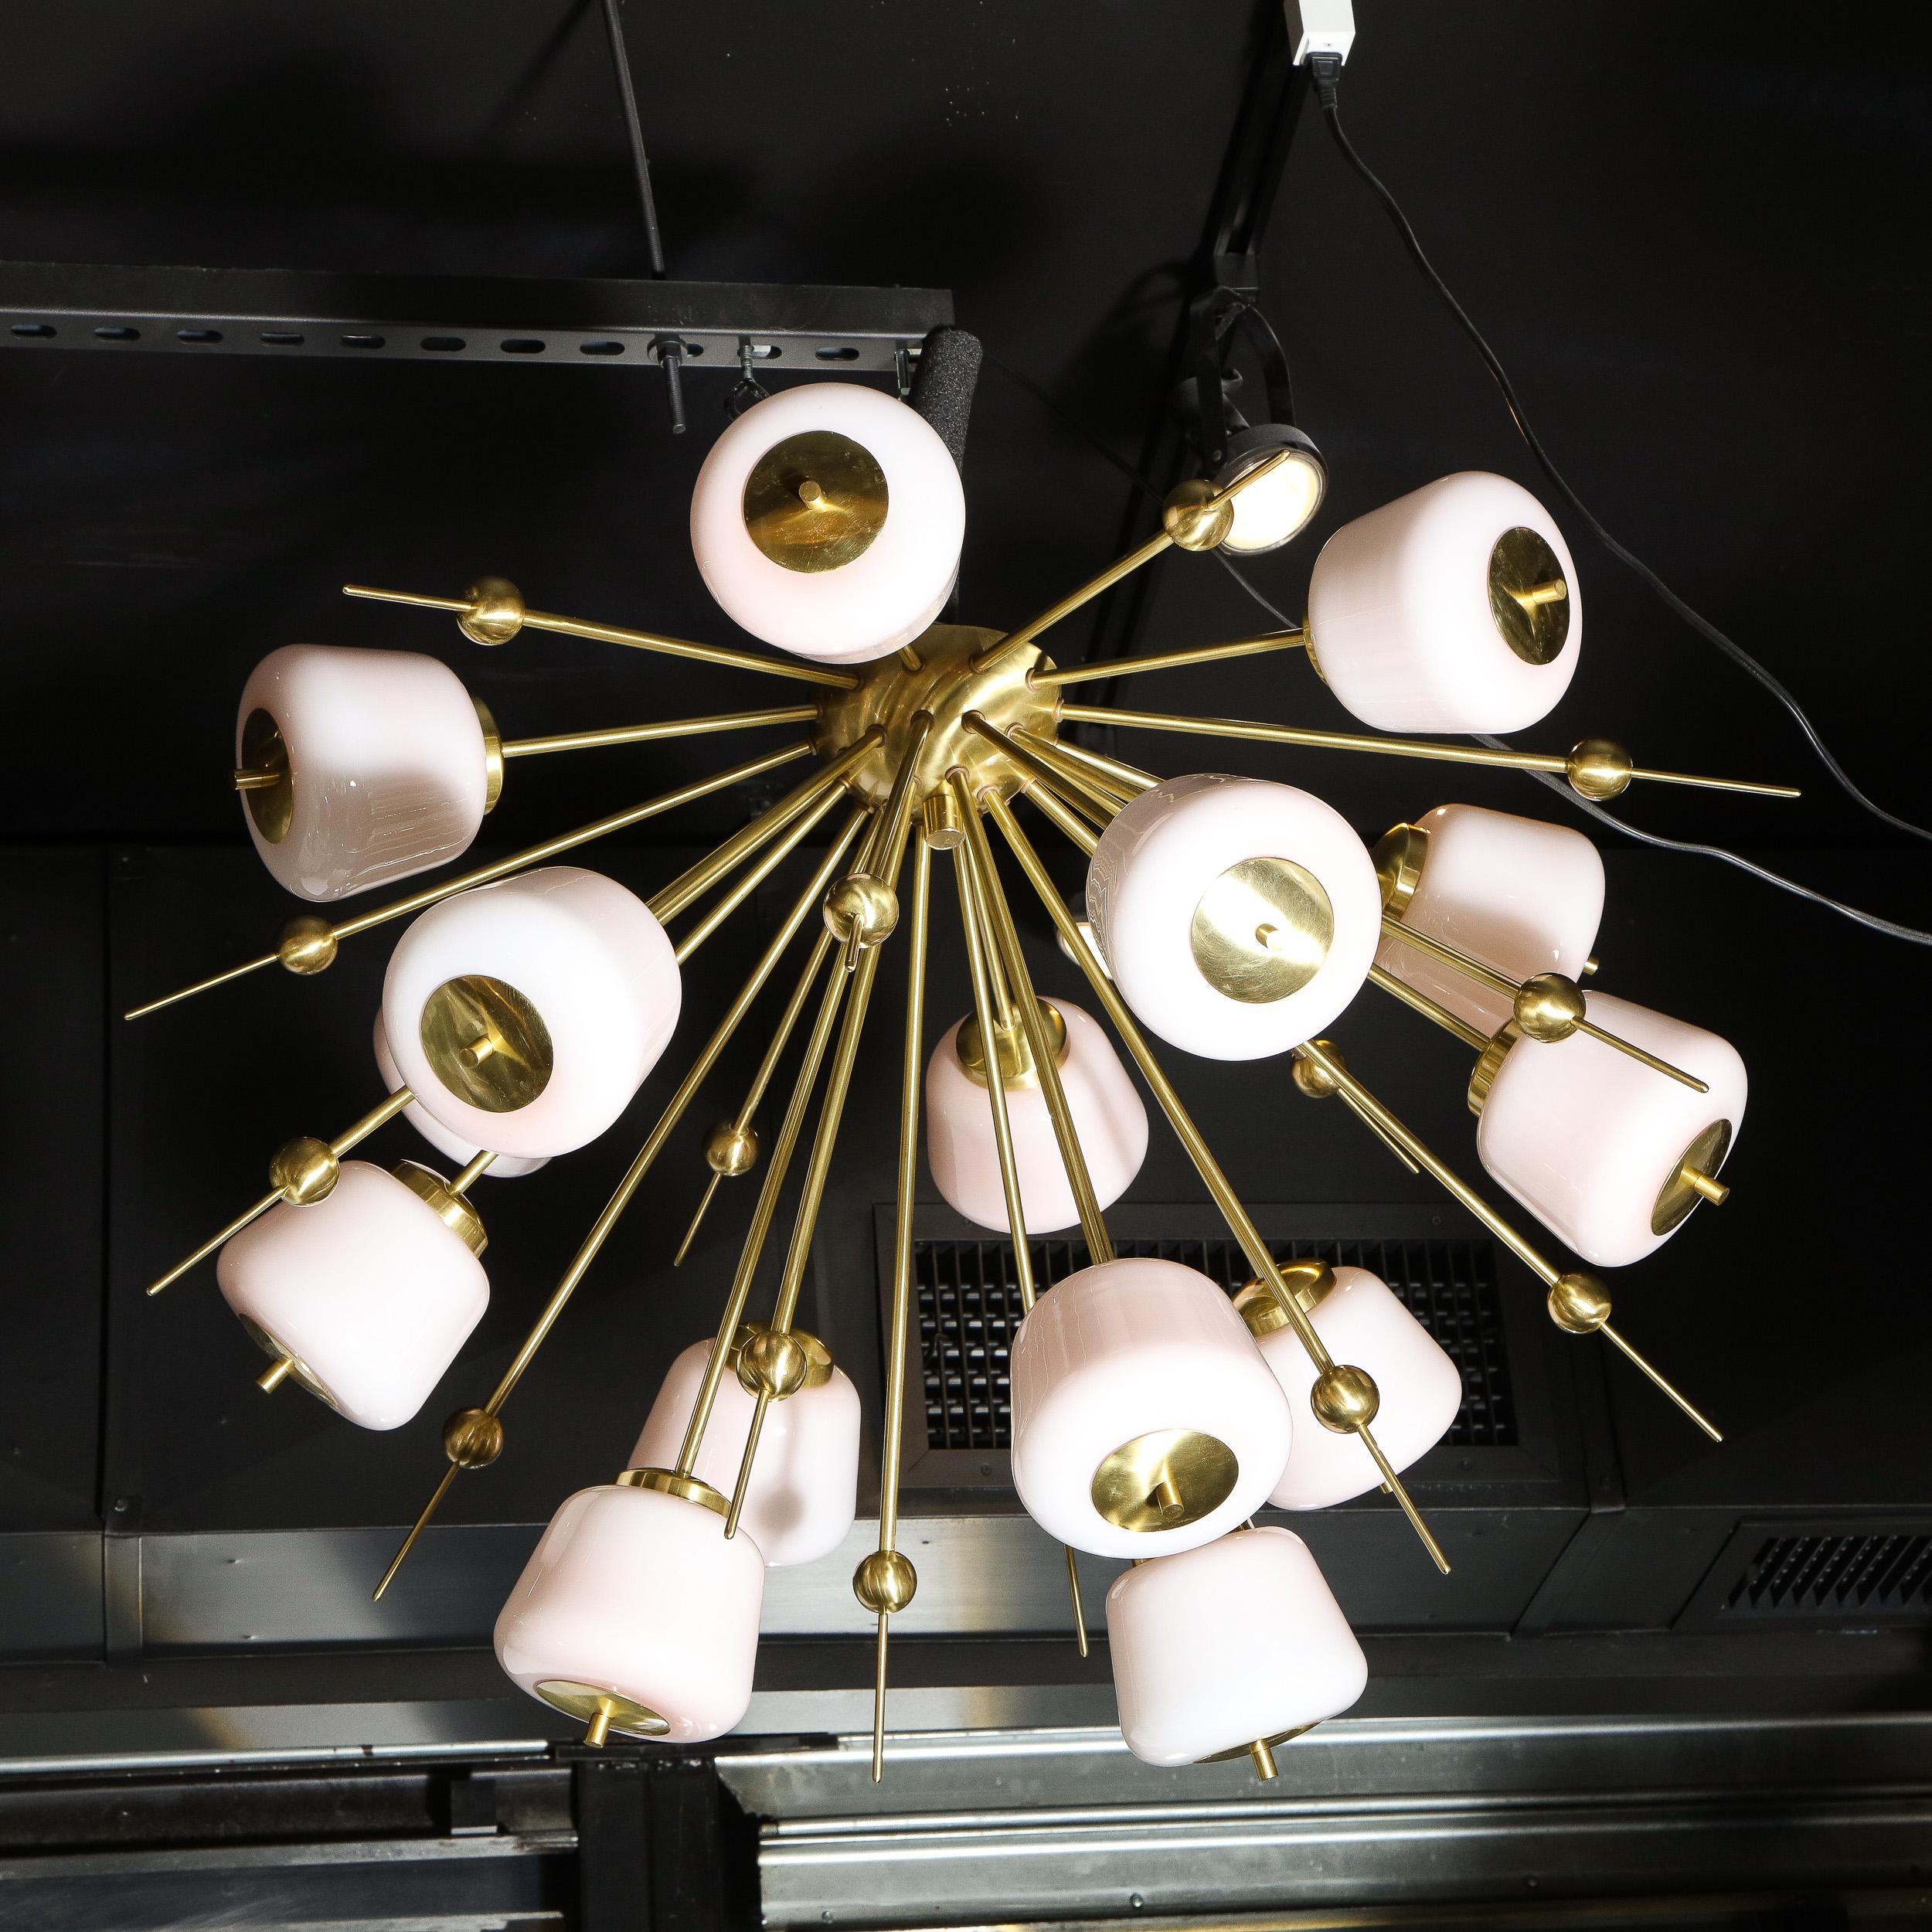 This graphic and sophisticated modernist flush mount chandelier was realized in Murano, Italy- the island off the coast of Venice renowned for centuries for its superlative glass production. It features a half spherical canopy that supports an